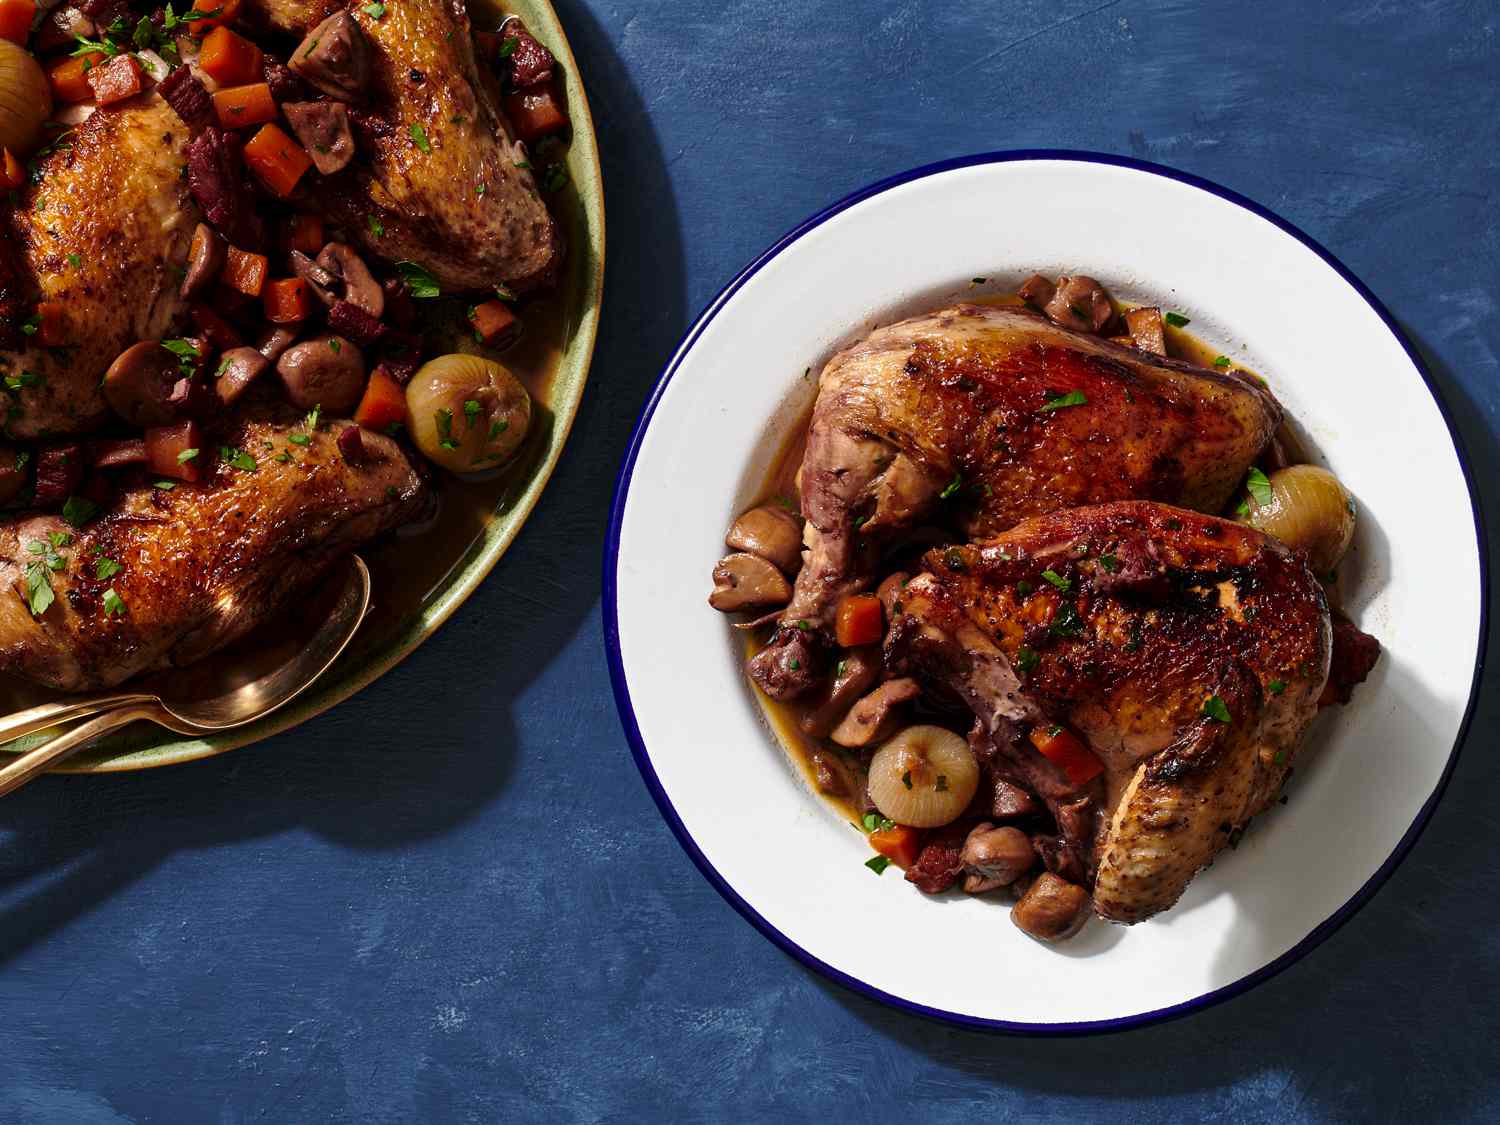 12-facts-about-national-coq-au-vin-day-may-29th